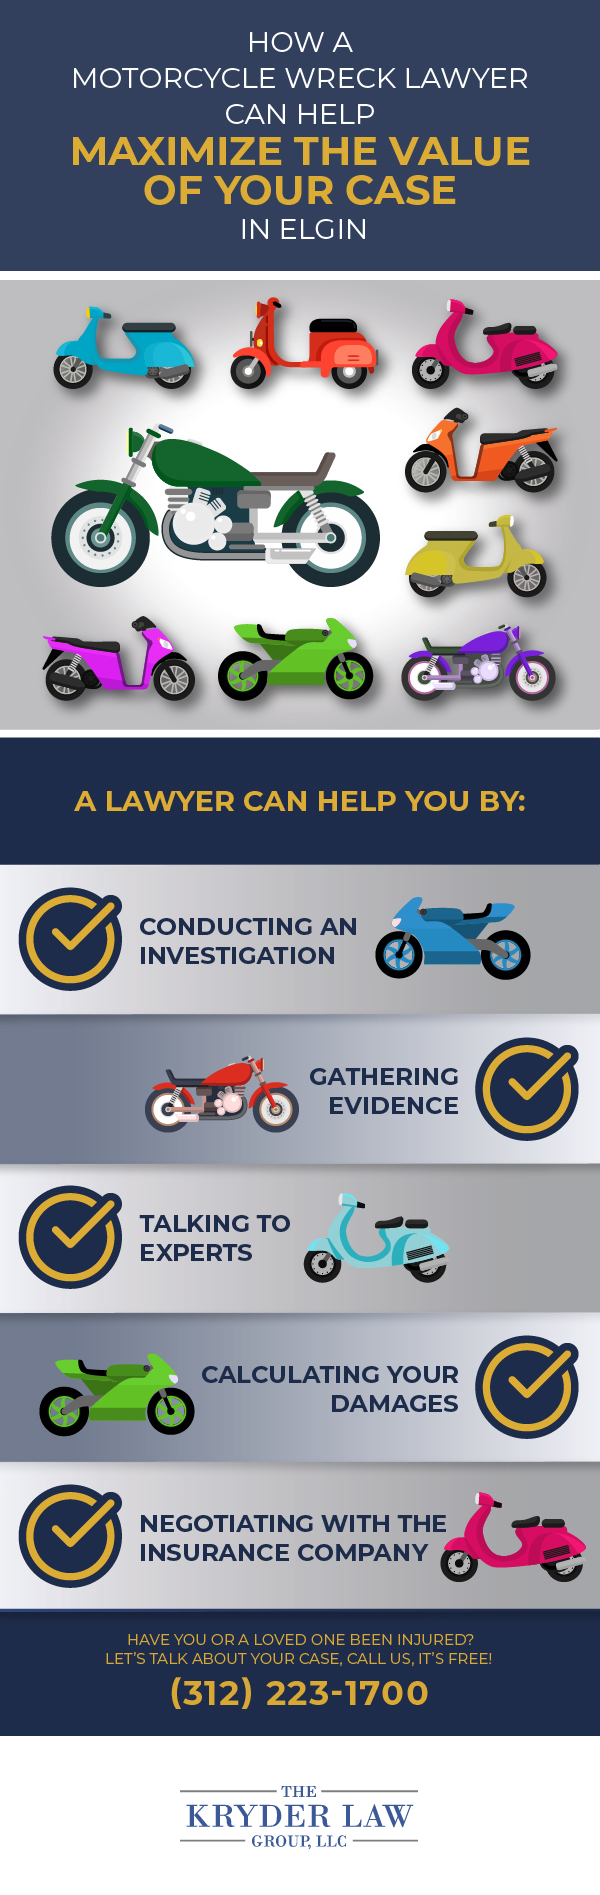 How a Motorcycle Wreck Lawyer Can Help Maximize the Value of Your Case in Elgin Infographic